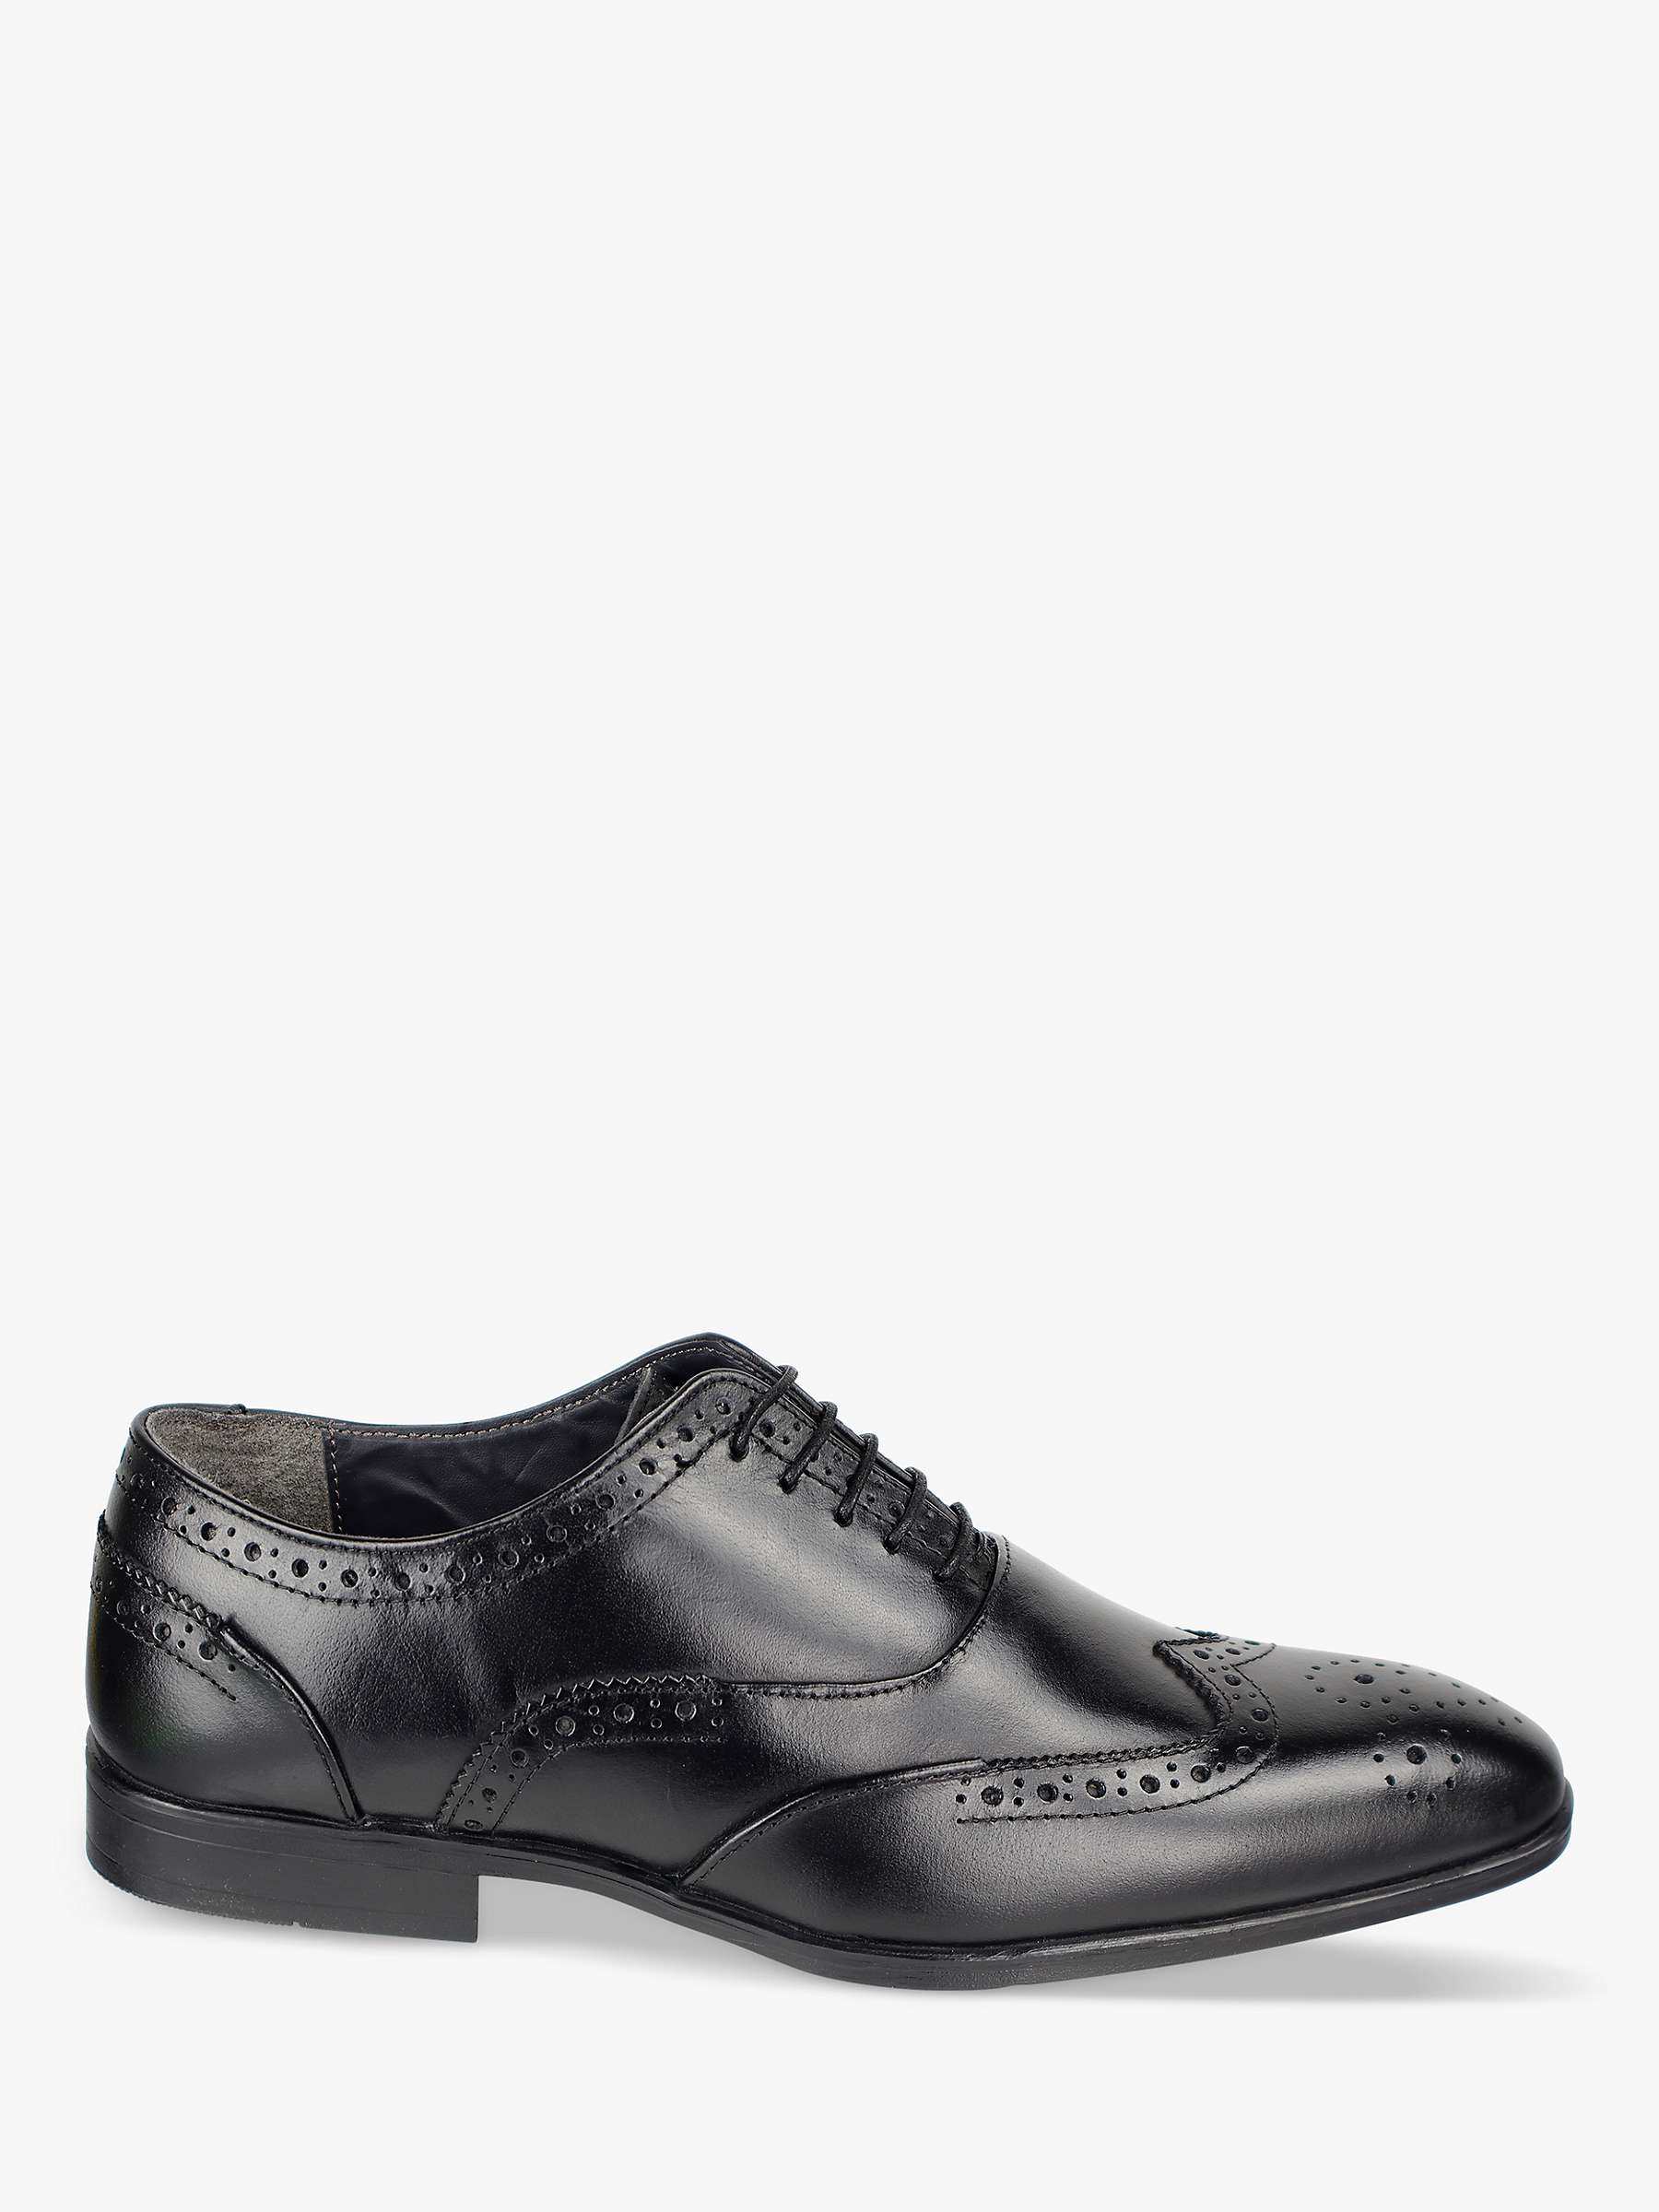 Buy Silver Street London Oxford Shoes, Black Online at johnlewis.com